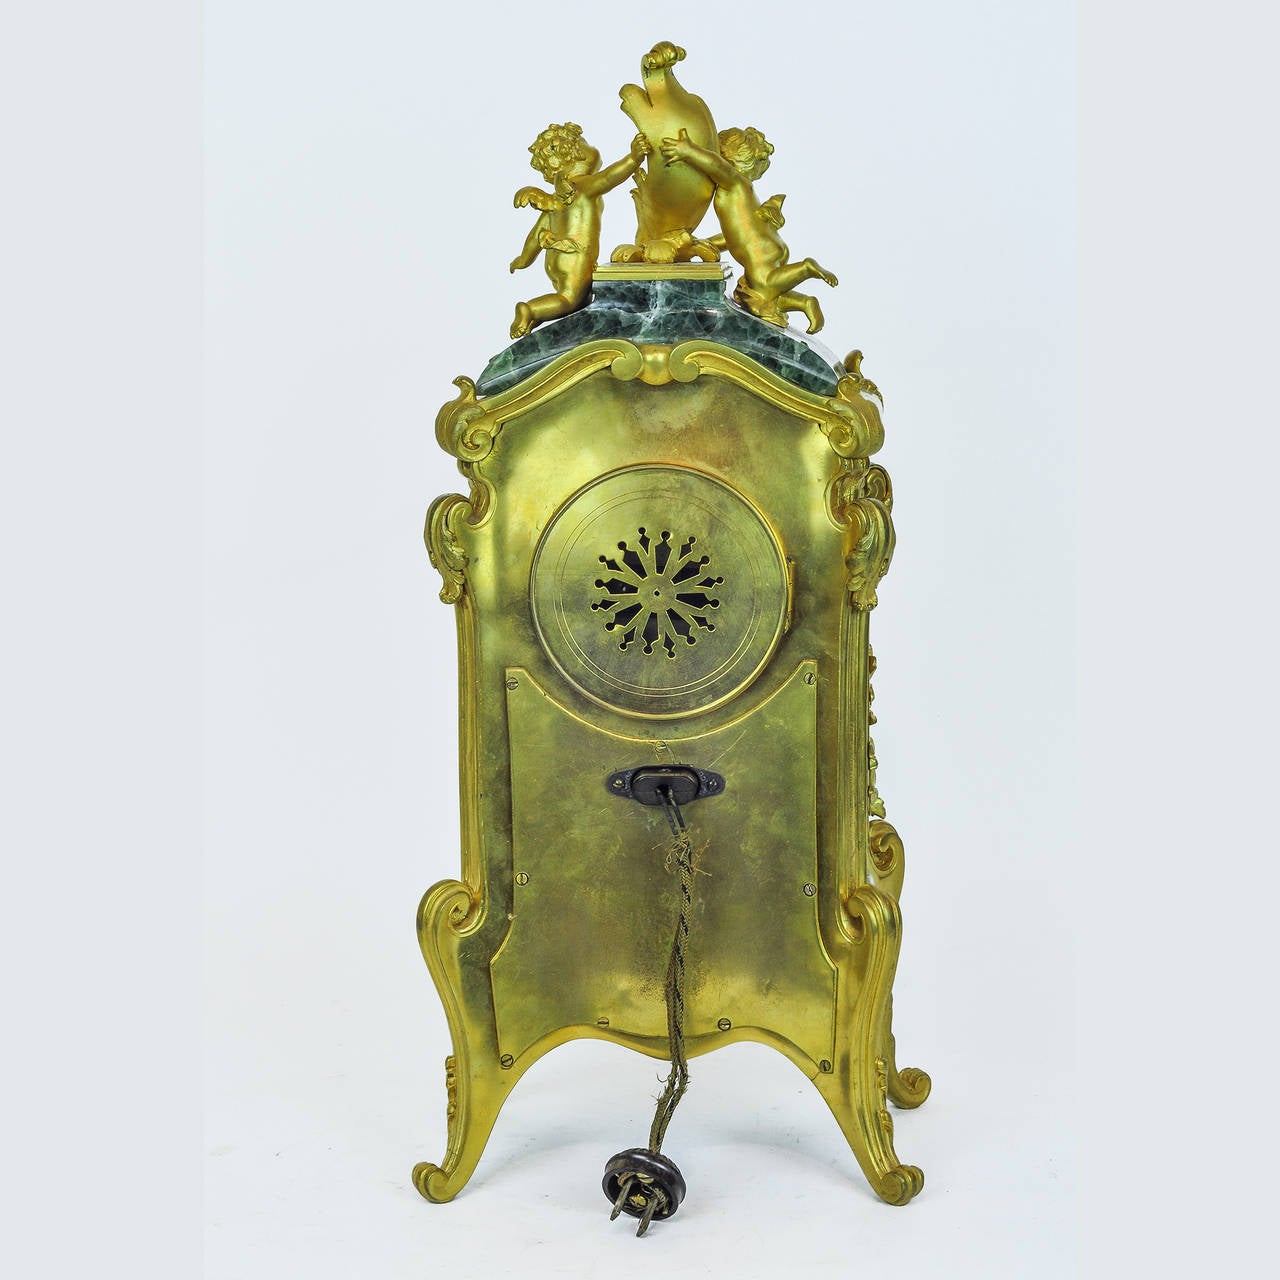 Unusual Louis XV Style Marble and Bronze Figural Mantel Clock
Stock Number: CC14